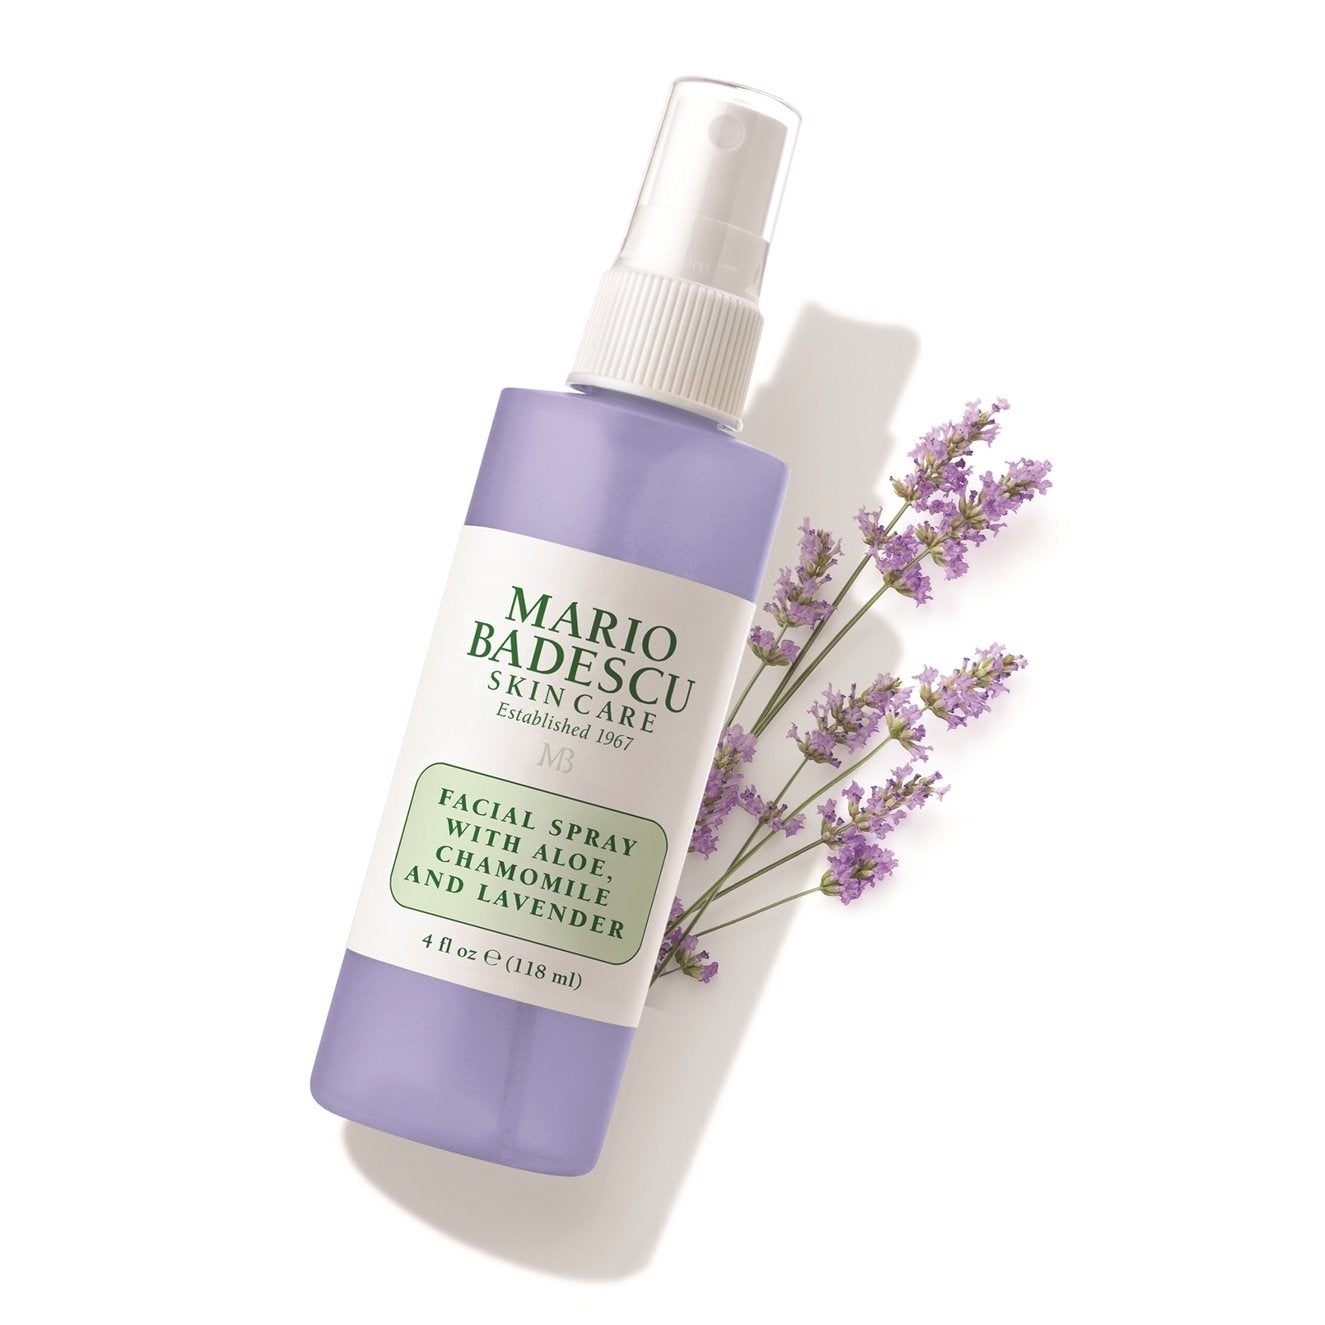 Load image into Gallery viewer, Mario Badescu Facial Spray with Aloe, Chamomile and Lavender
